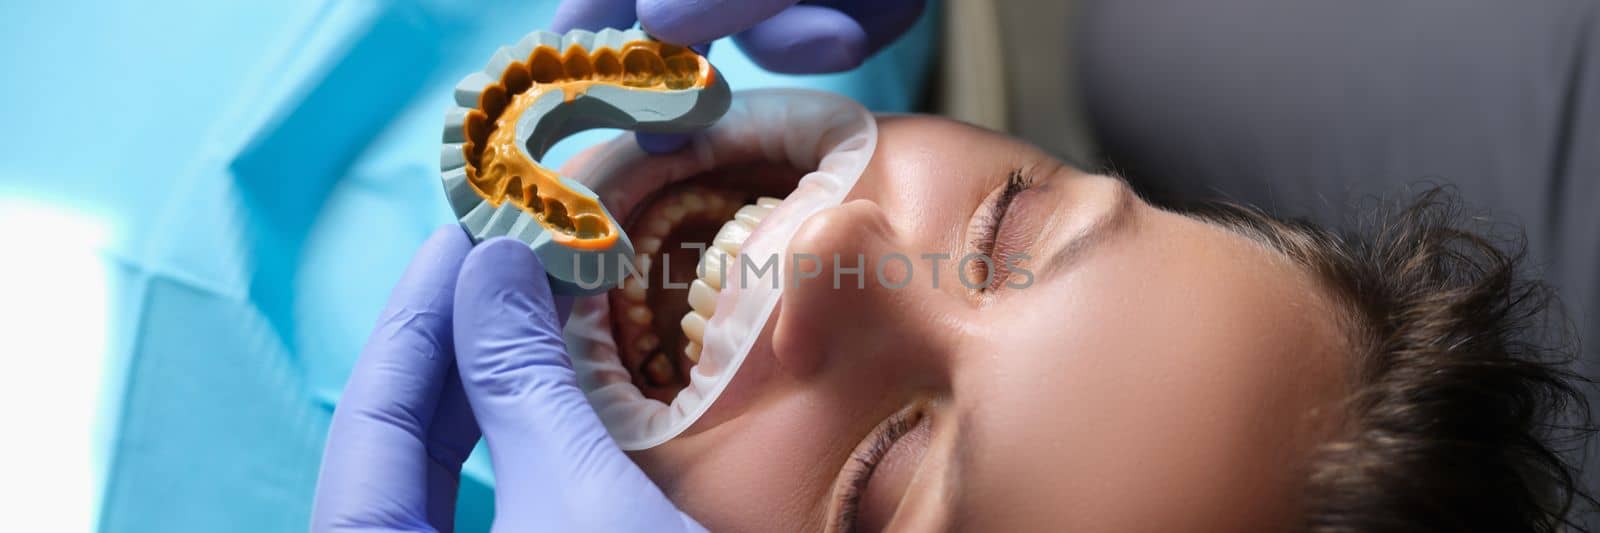 Simulation of artificial teeth on plaster model and patient with open mouth at dentist appointment by kuprevich